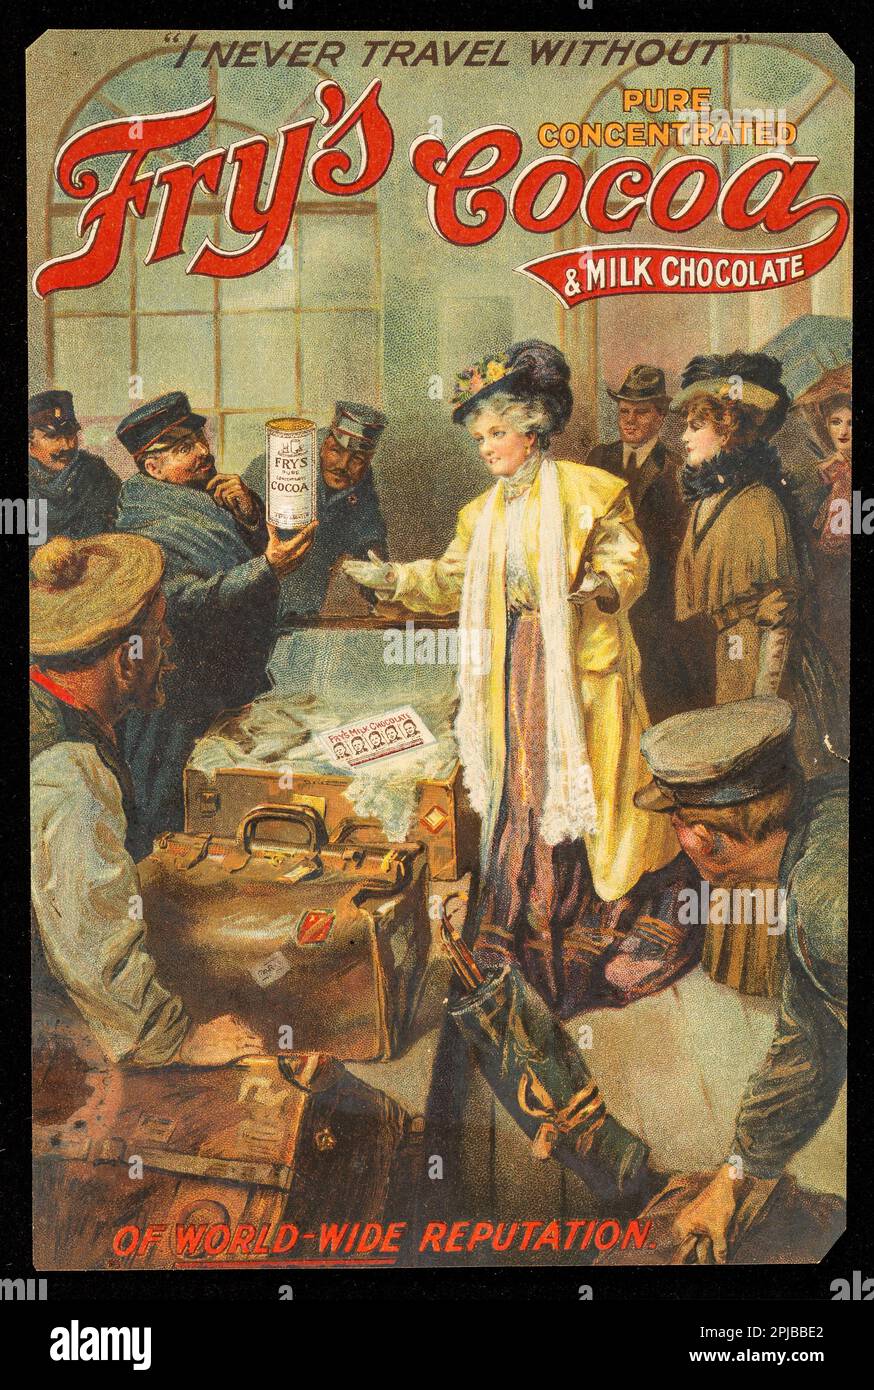 'I never travel without' Fry's pure concentrated cocoa & milk chocolate of worldwide reputation J.S. Fry & Sons Ltd, vintage advertising from c1900 Stock Photo